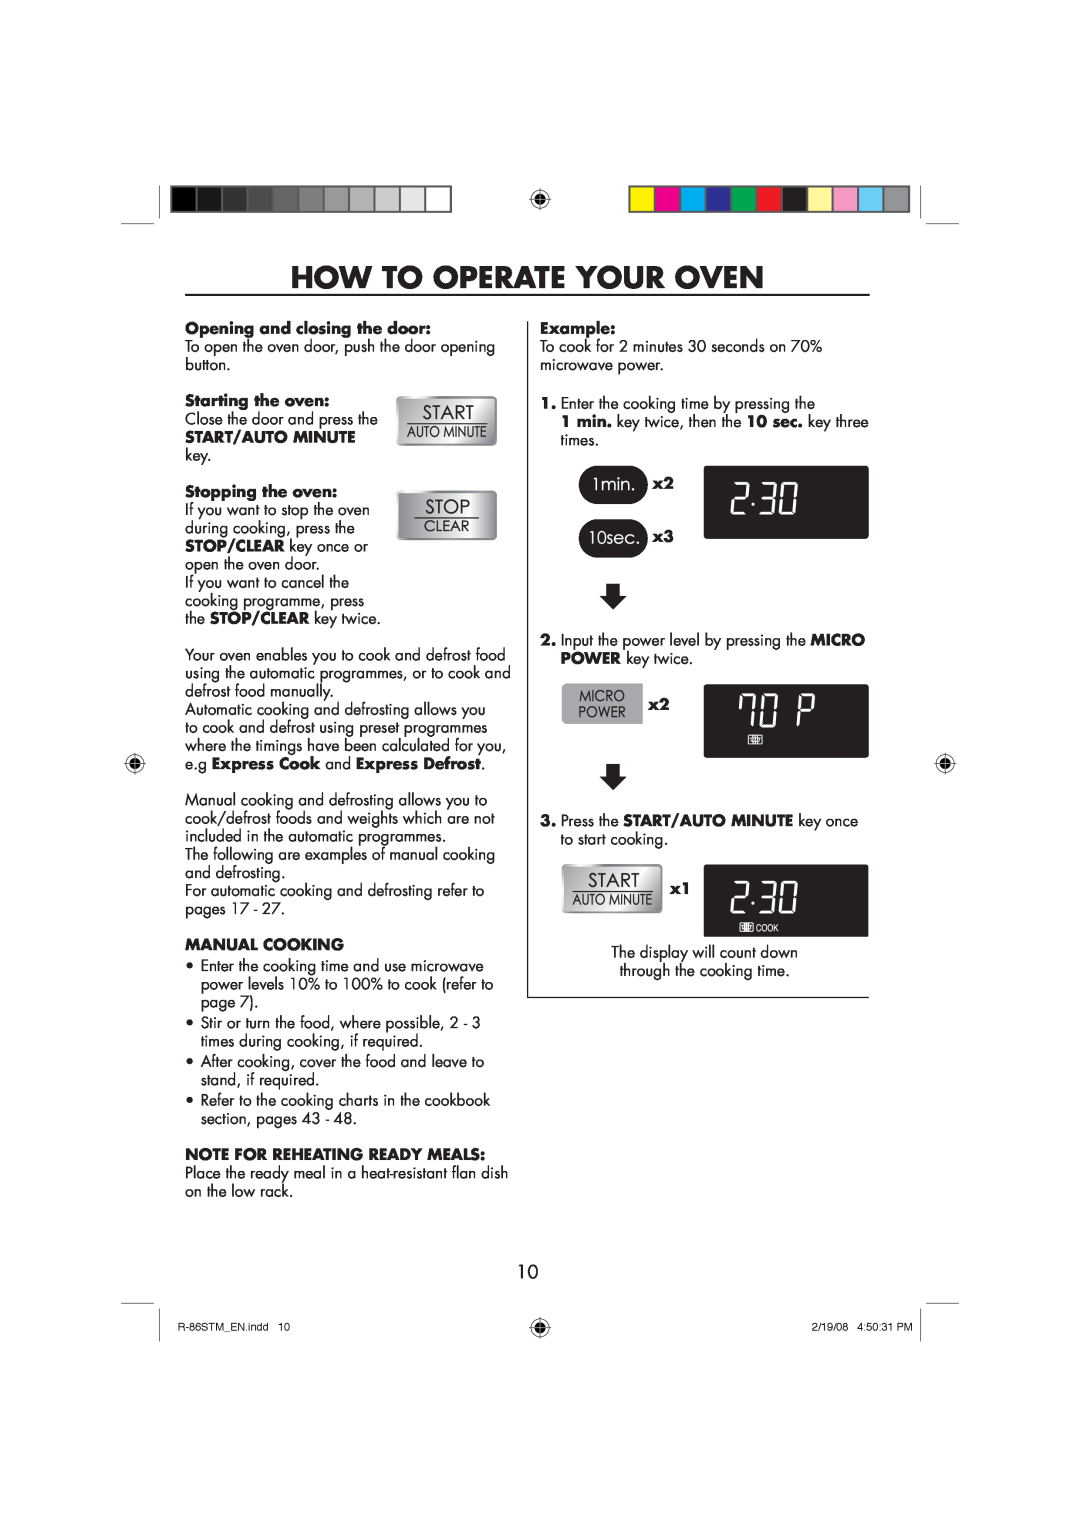 Sharp R-86STM manual How To Operate Your Oven, Opening and closing the door, Starting the oven, Manual Cooking, Example, x2 